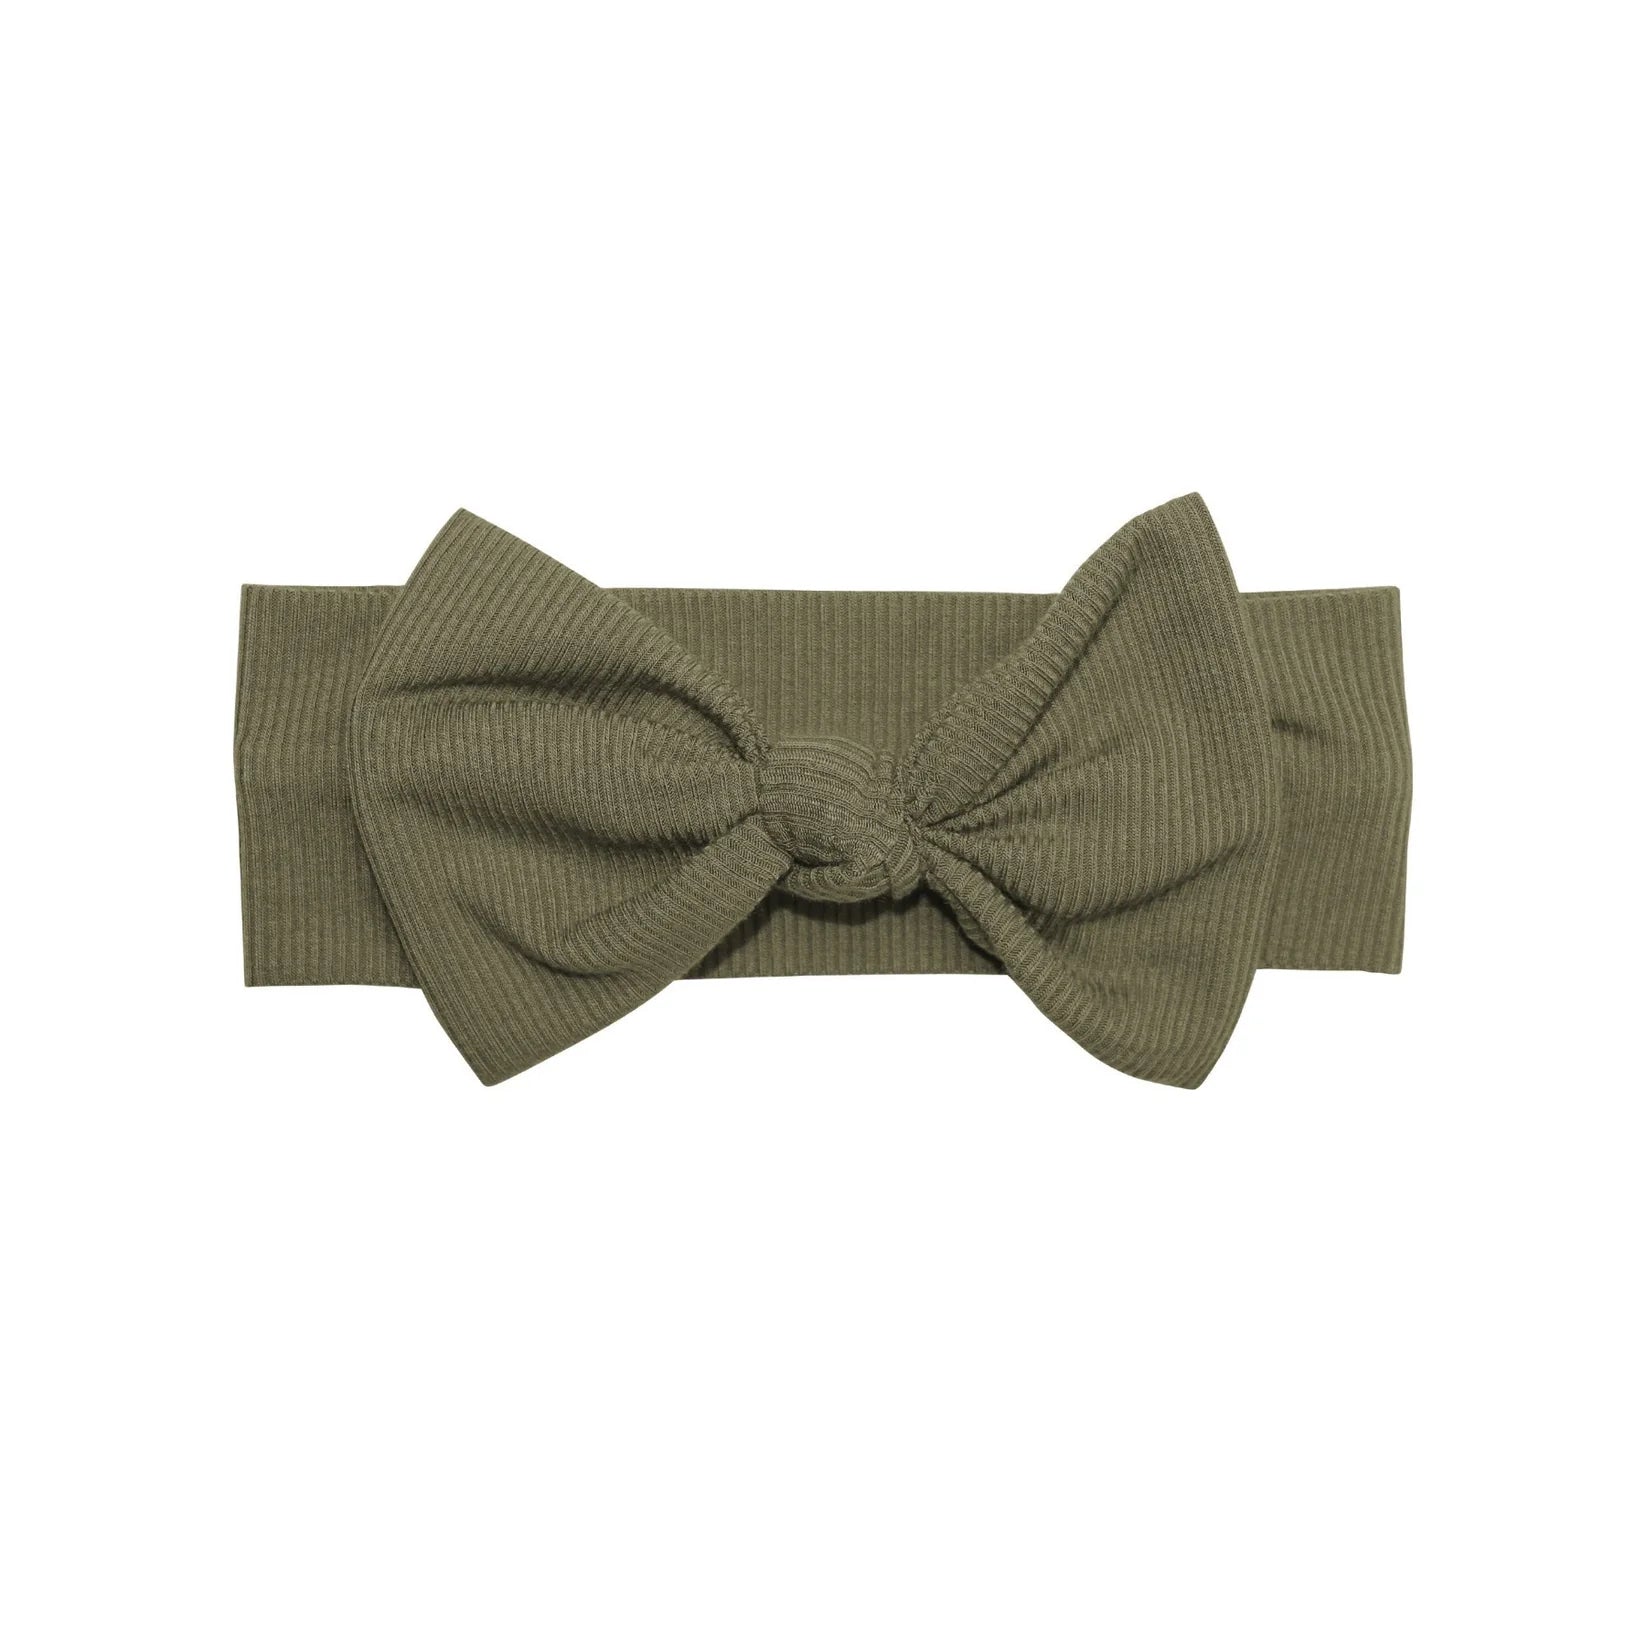 Olive Small Ribbed Headband Bow - RELEASING Oct. 25th Brave Little Ones Headbands Lil Tulips